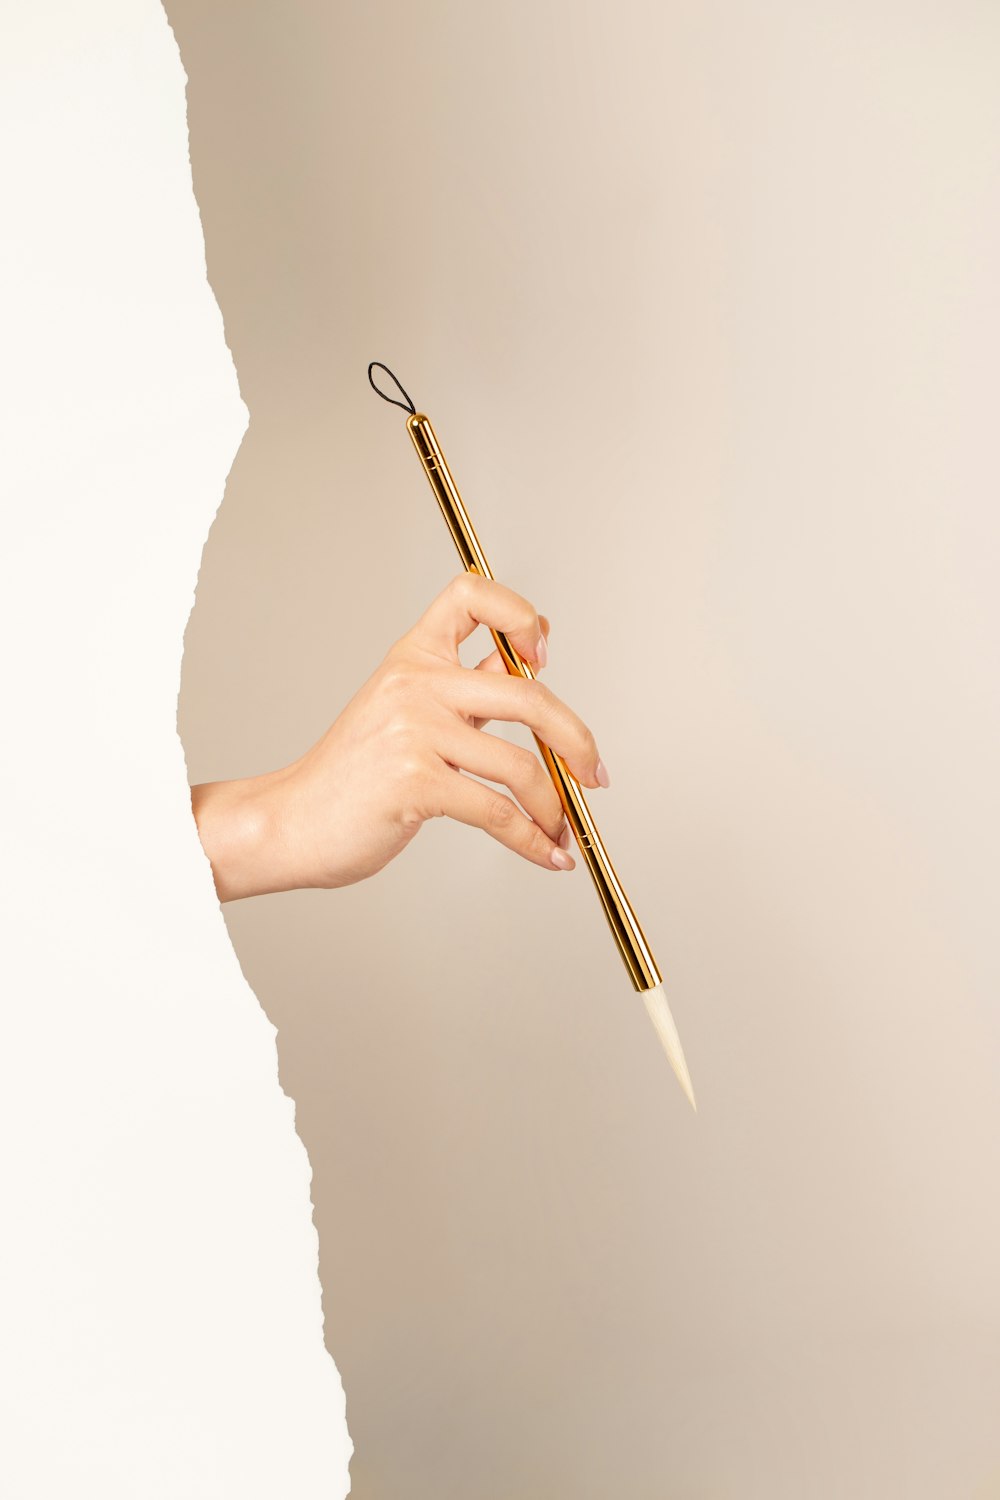 a person holding a golden pen in their hand